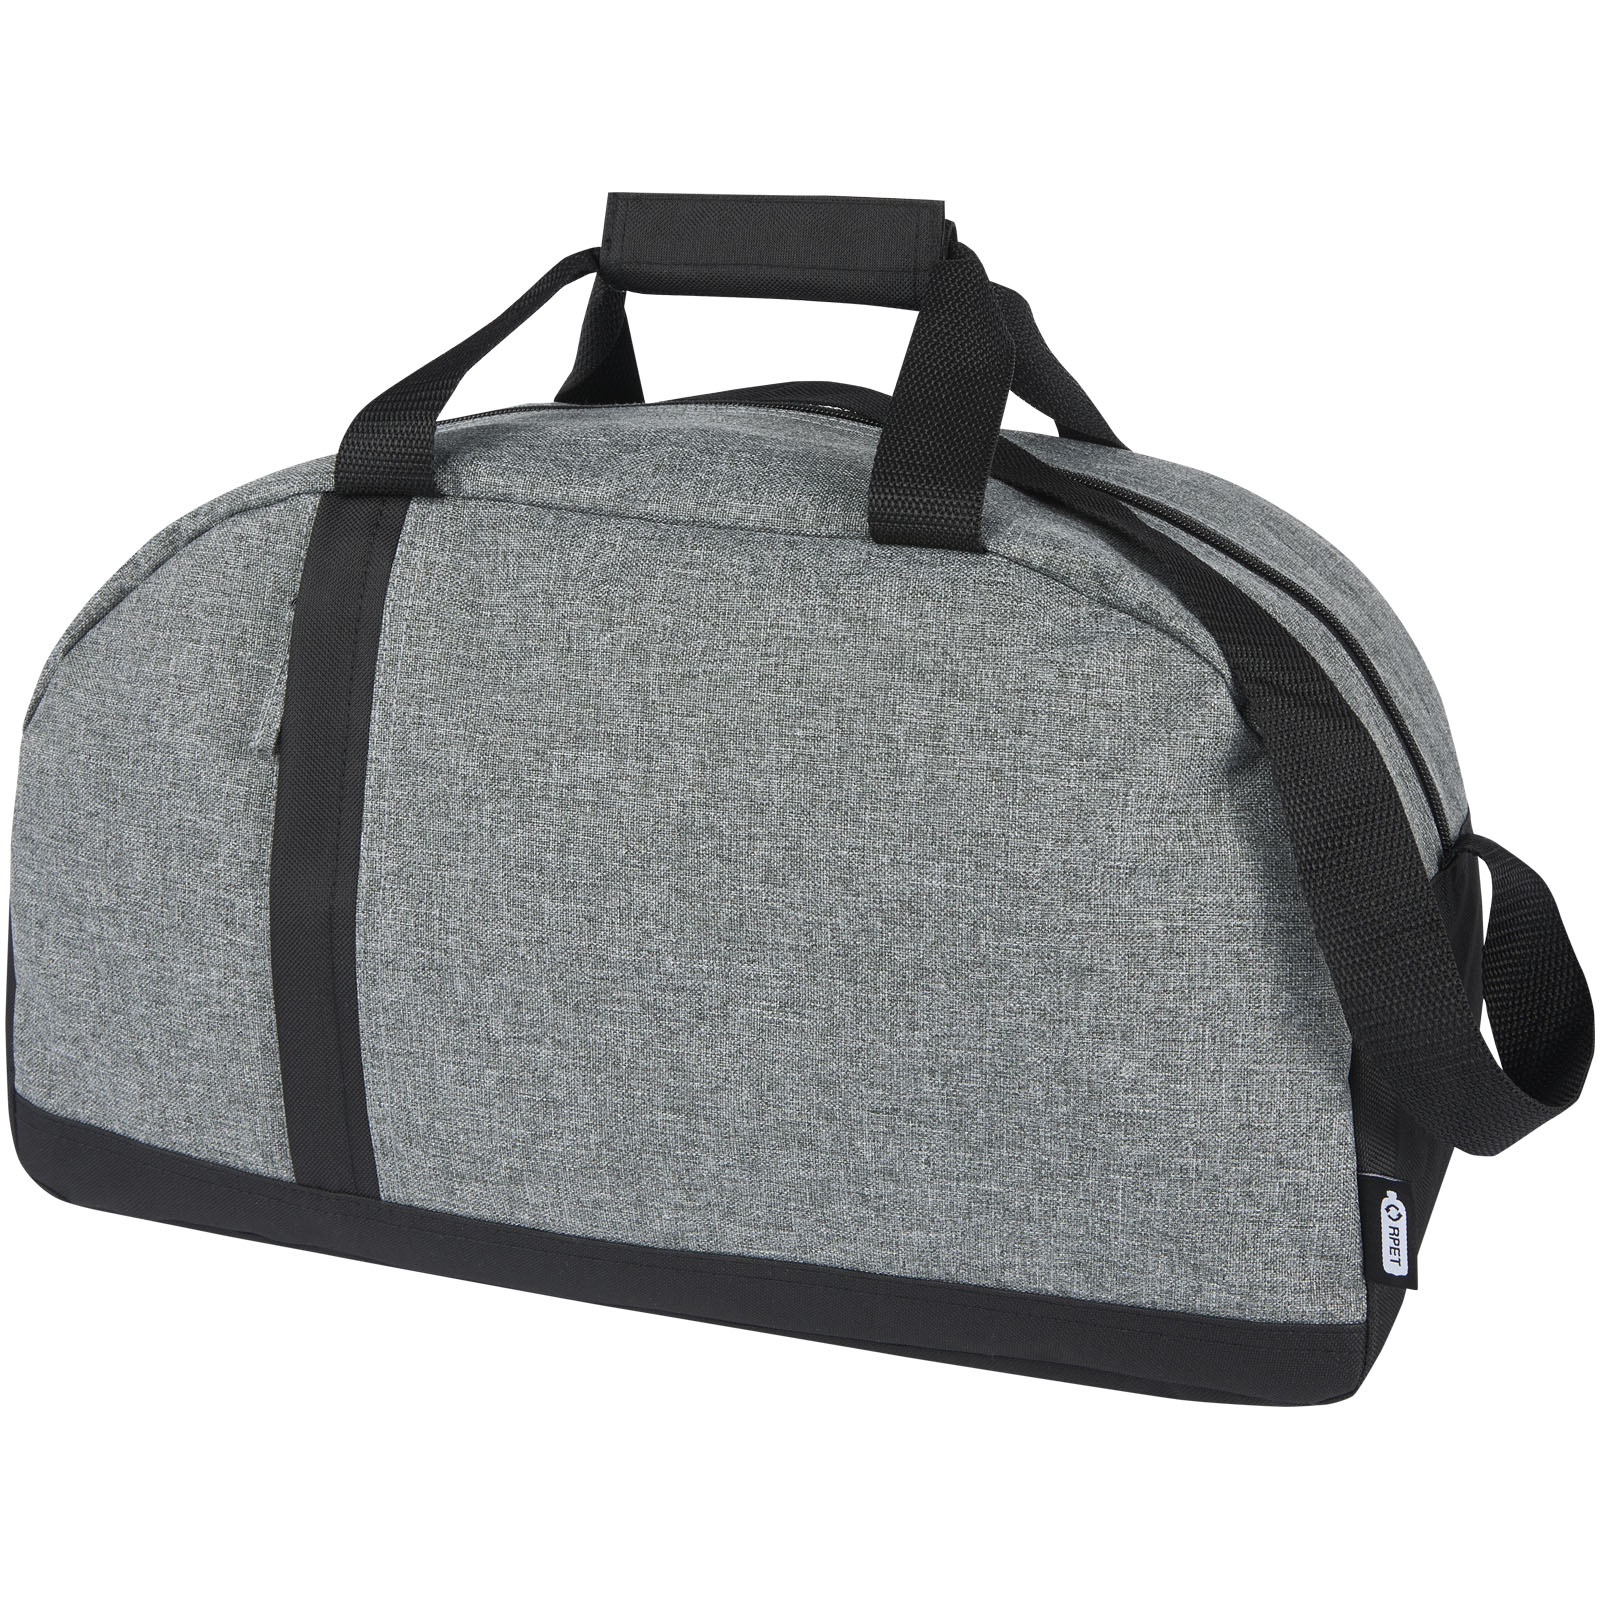 Sports bag RECLAIM made of recycled materials, 21 l - solid black / heather grey